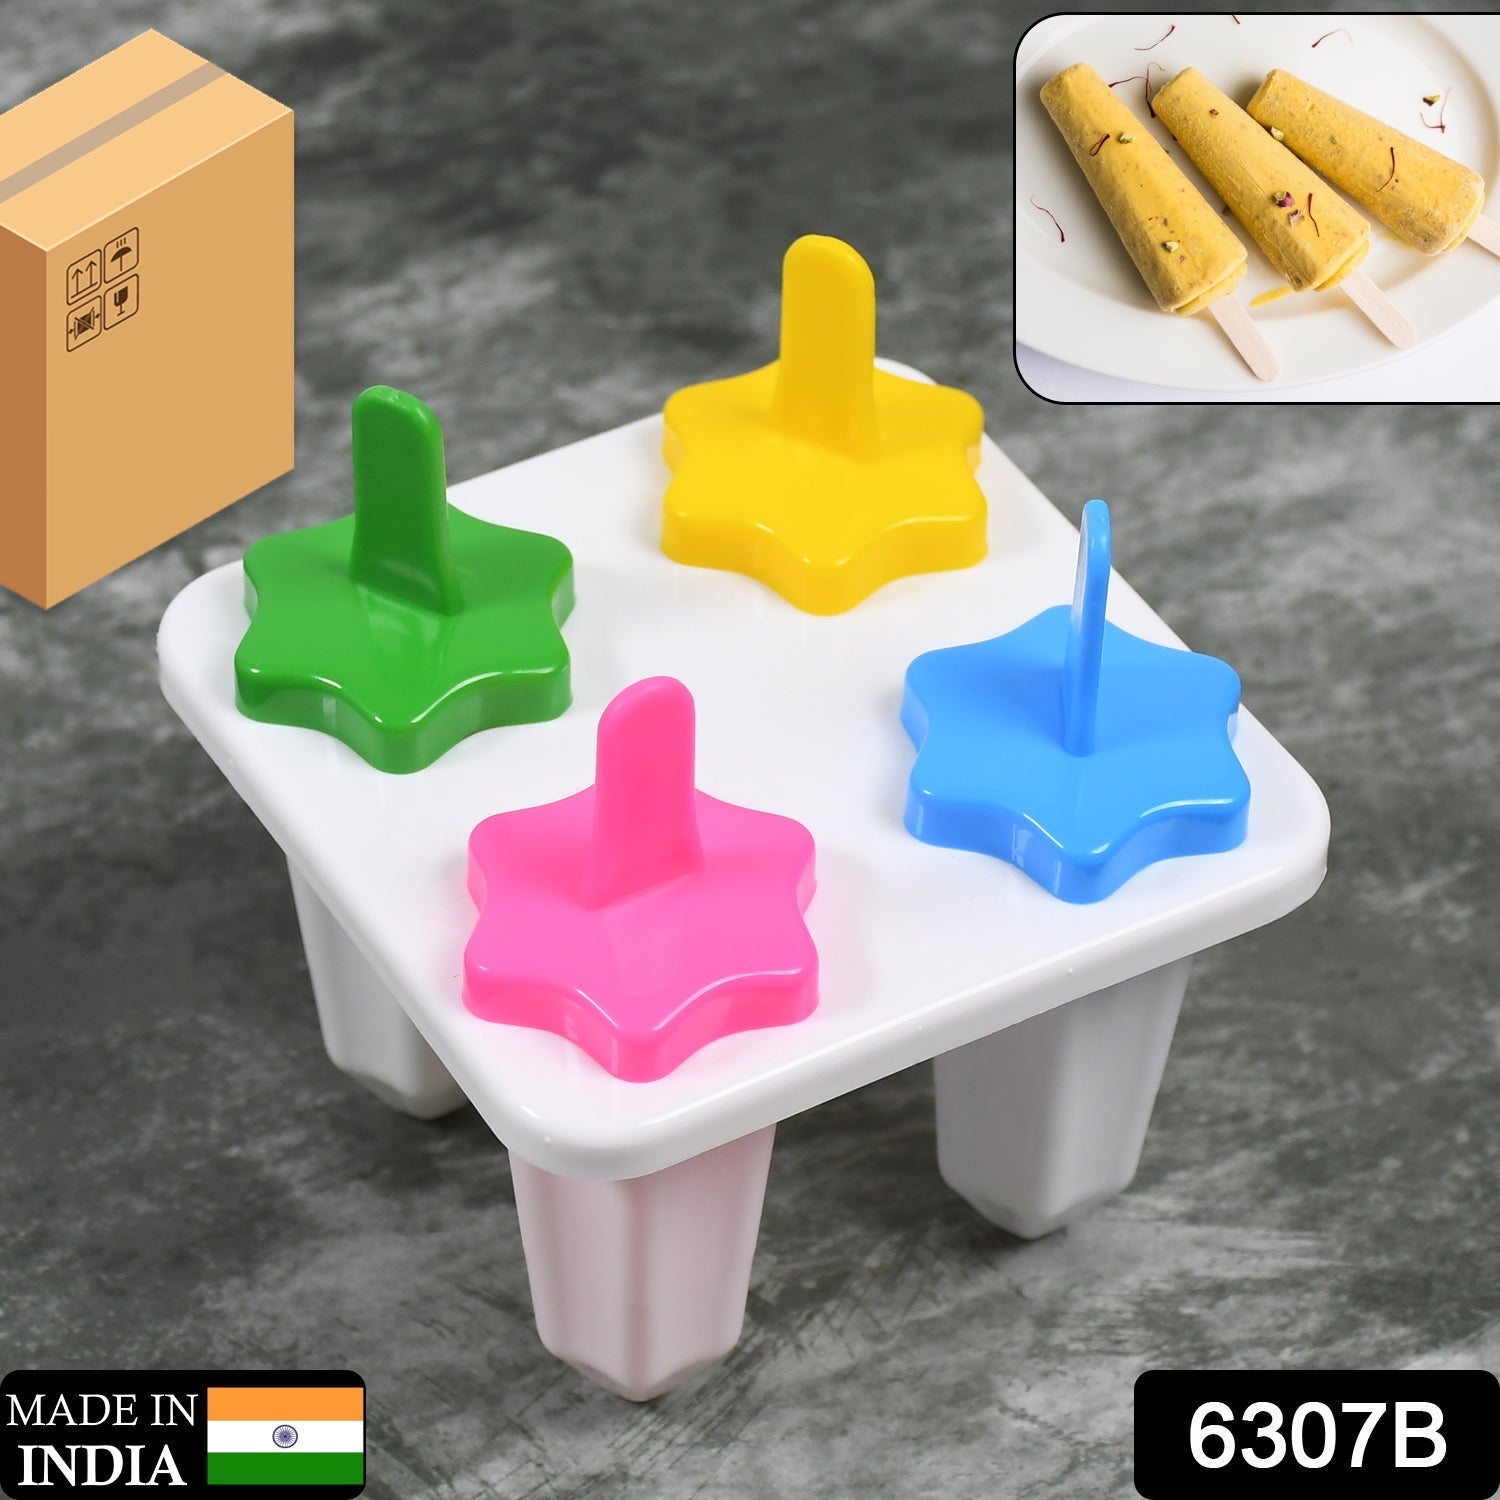 6307B 4Pc Ice Candy Maker used for making ice-creams in all kinds of places including restaurants and ice-cream Parlours etc.